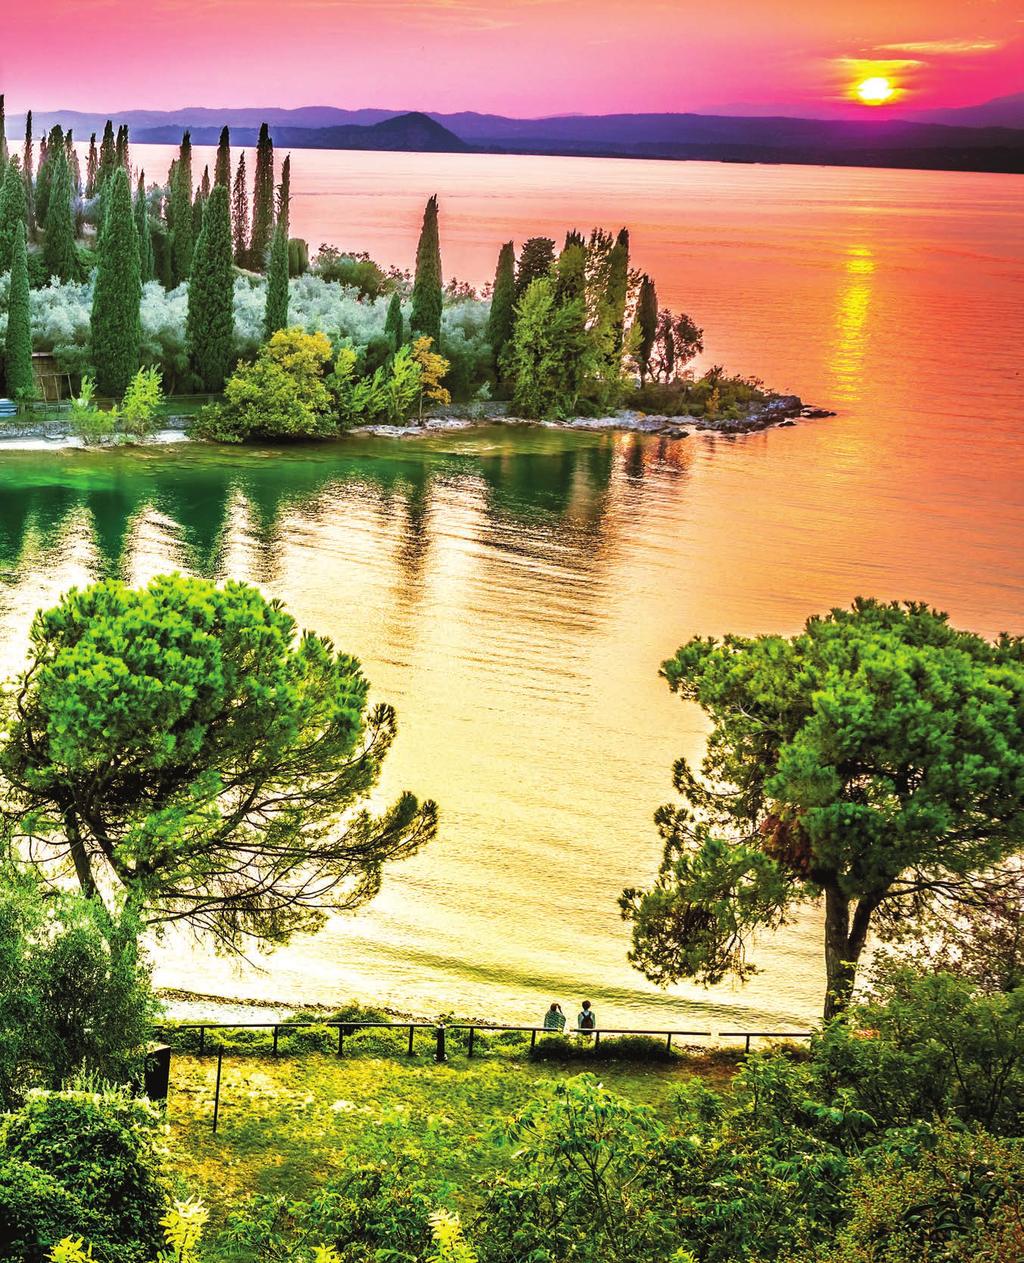 Sunset over Lake Garda in Italy s Lombardy